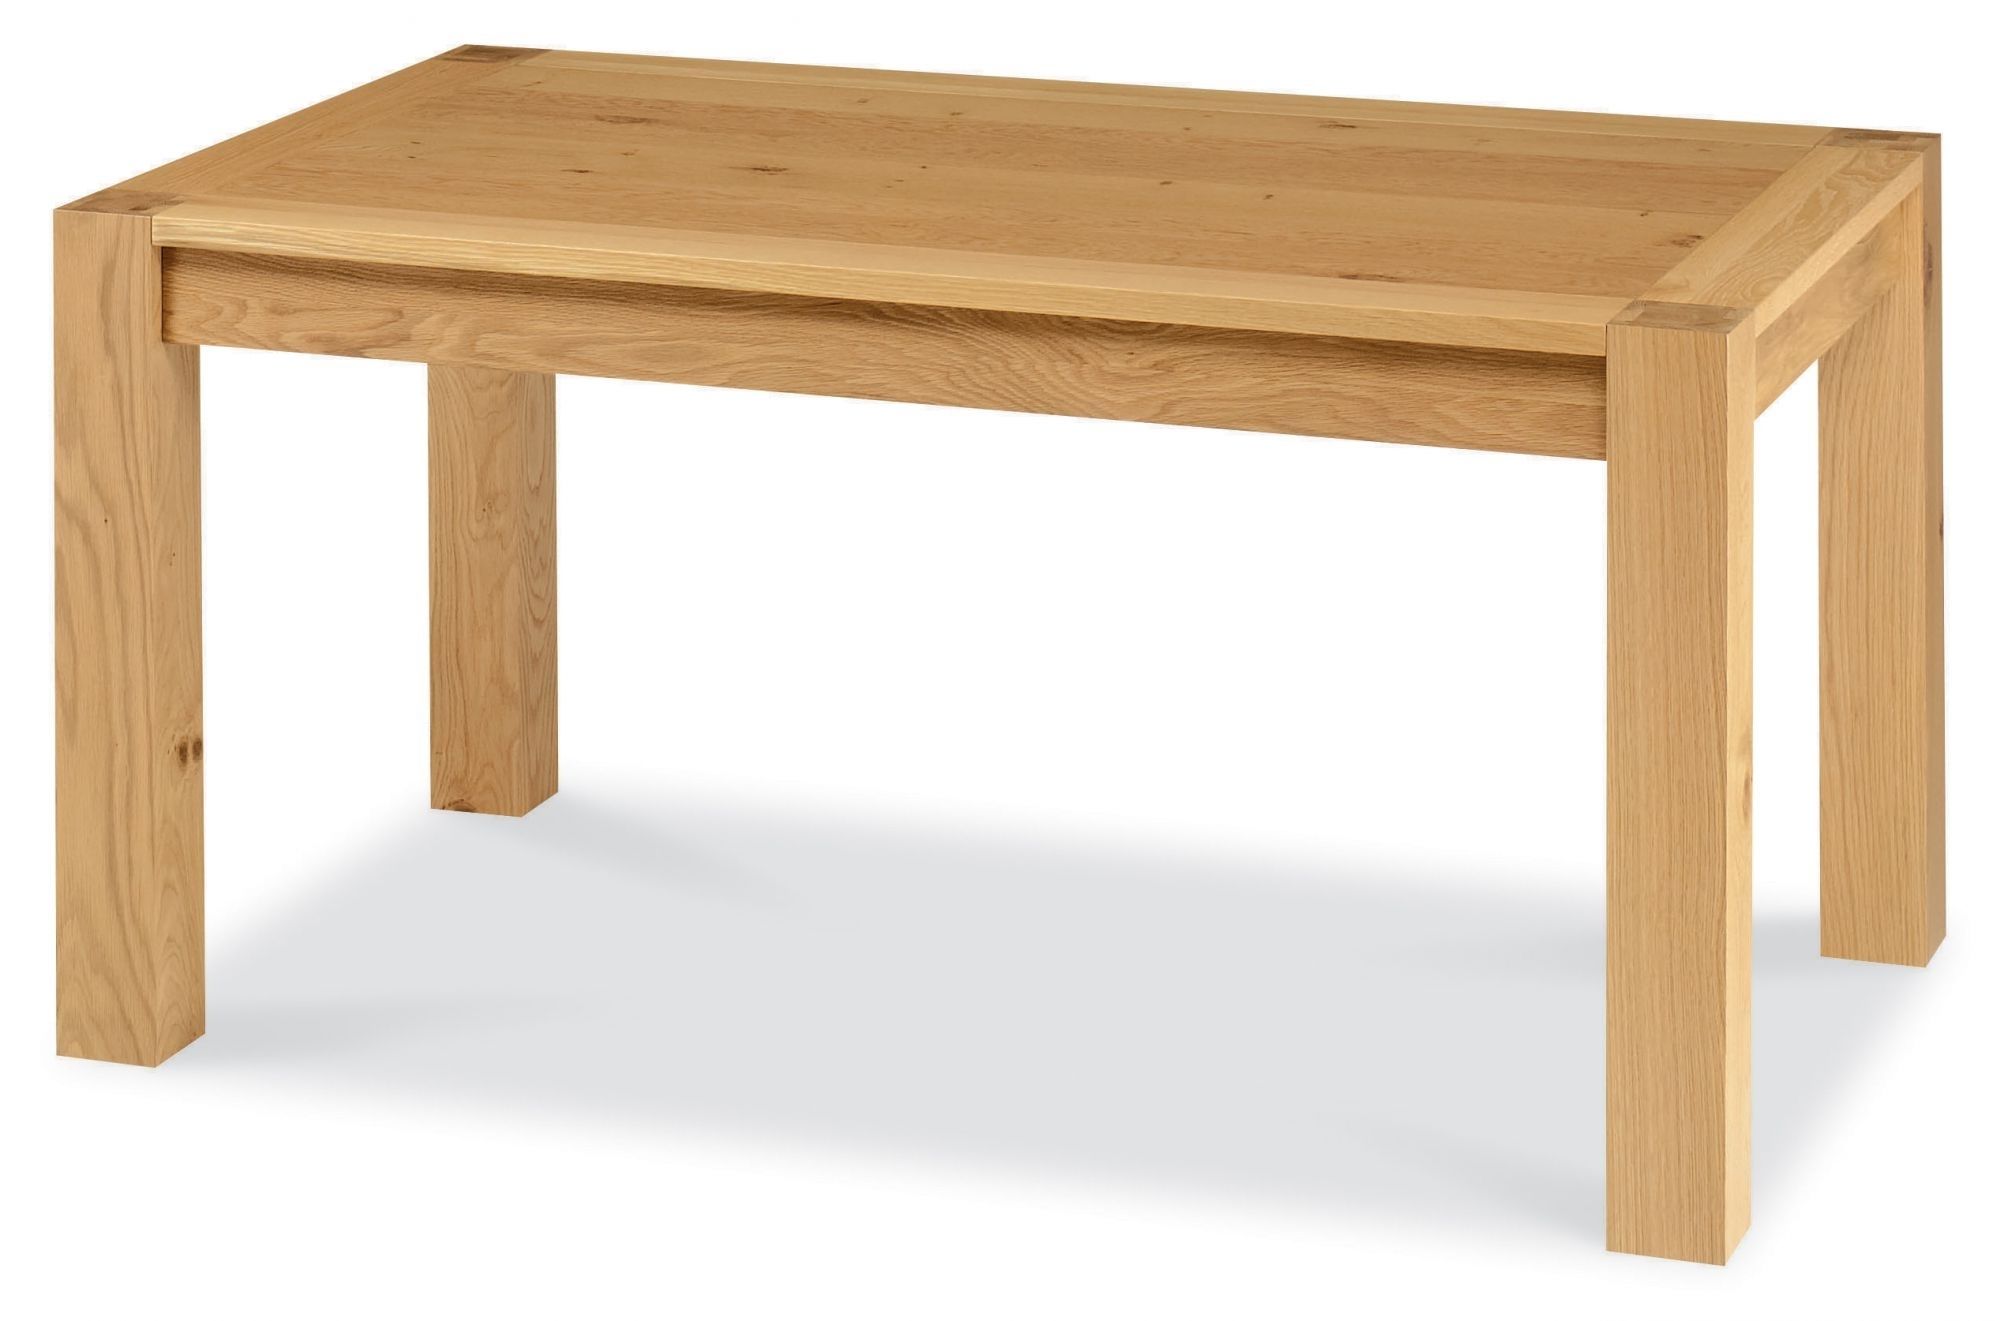 Lyon Dining Tables Regarding Most Popular Lyon 6 Seater Dining Table (View 15 of 25)